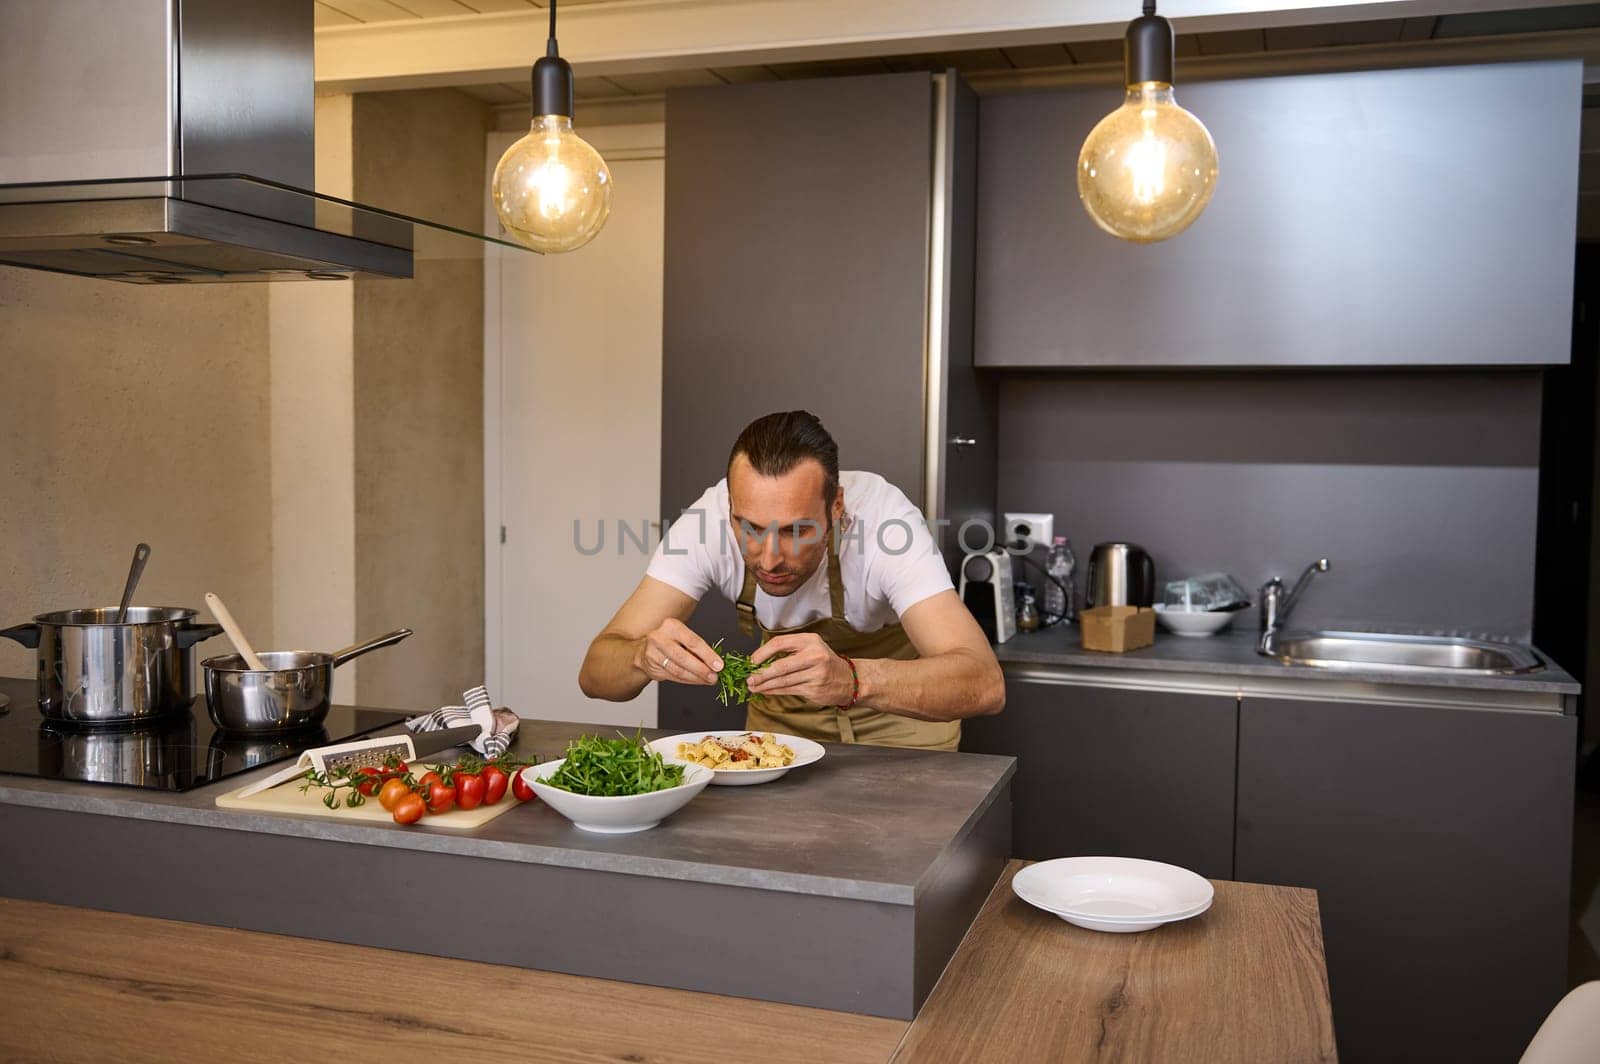 Male chef adding fresh green arugula leaves to Italian pasta with tomato sauce, garnishing the dish. A man preparing dinner in home kitchen. Selective focus on hands holding greens for seasoning food by artgf